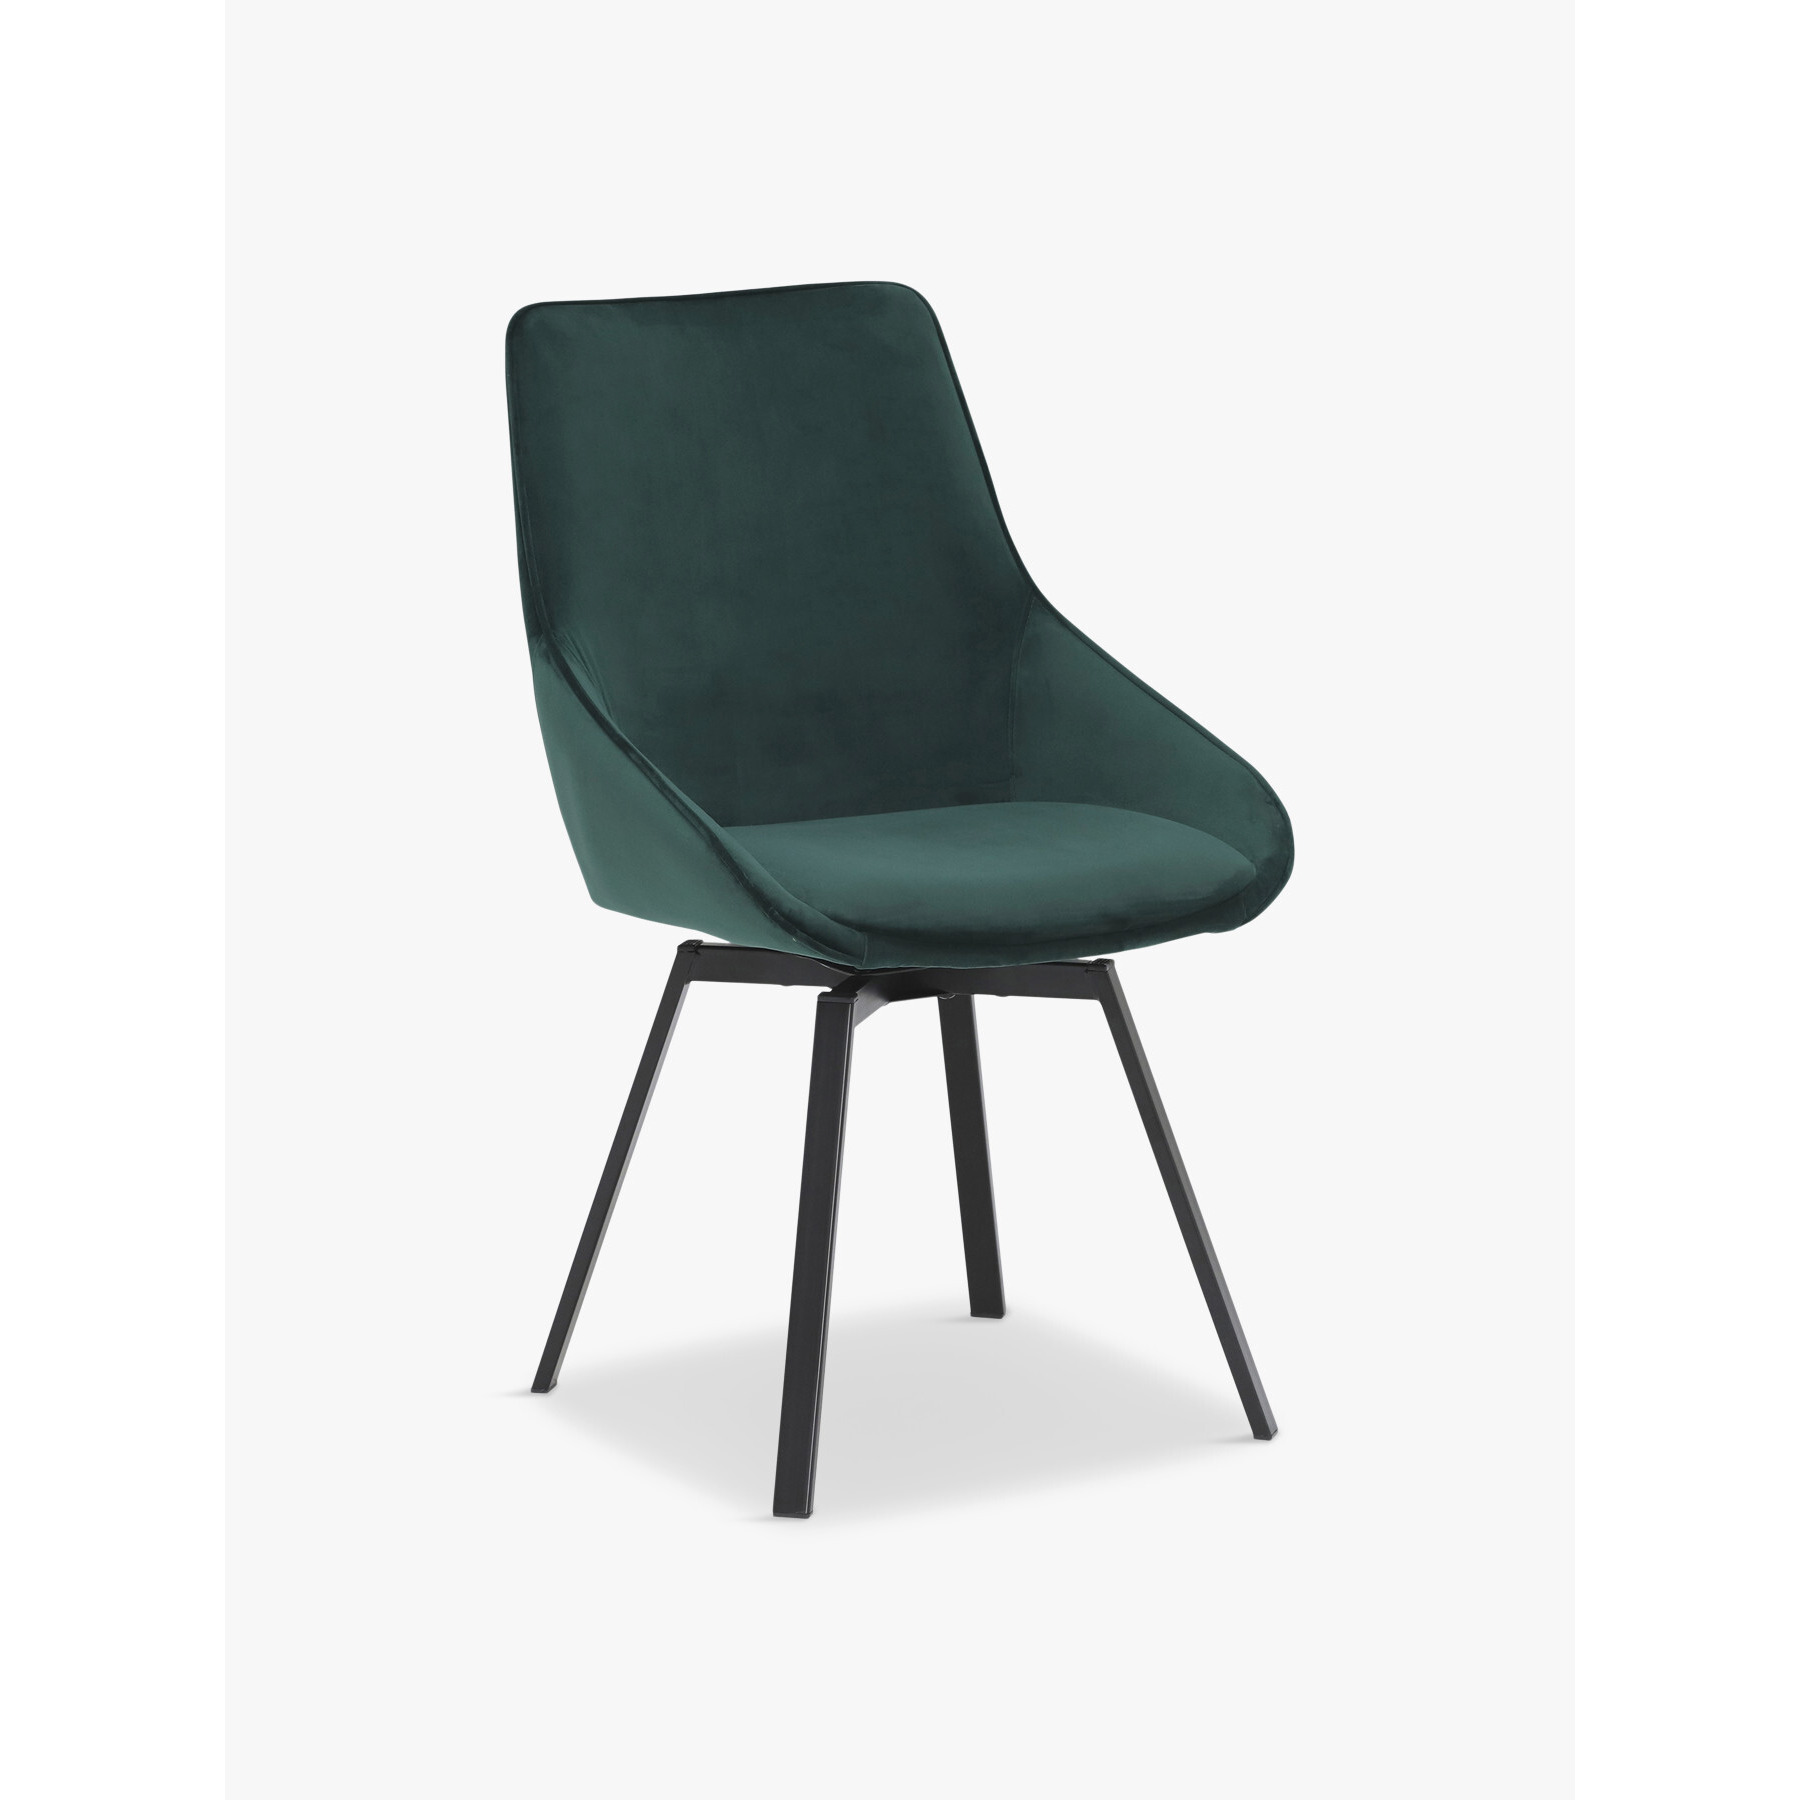 Barker and Stonehouse Beckton Dining Chair Green - image 1